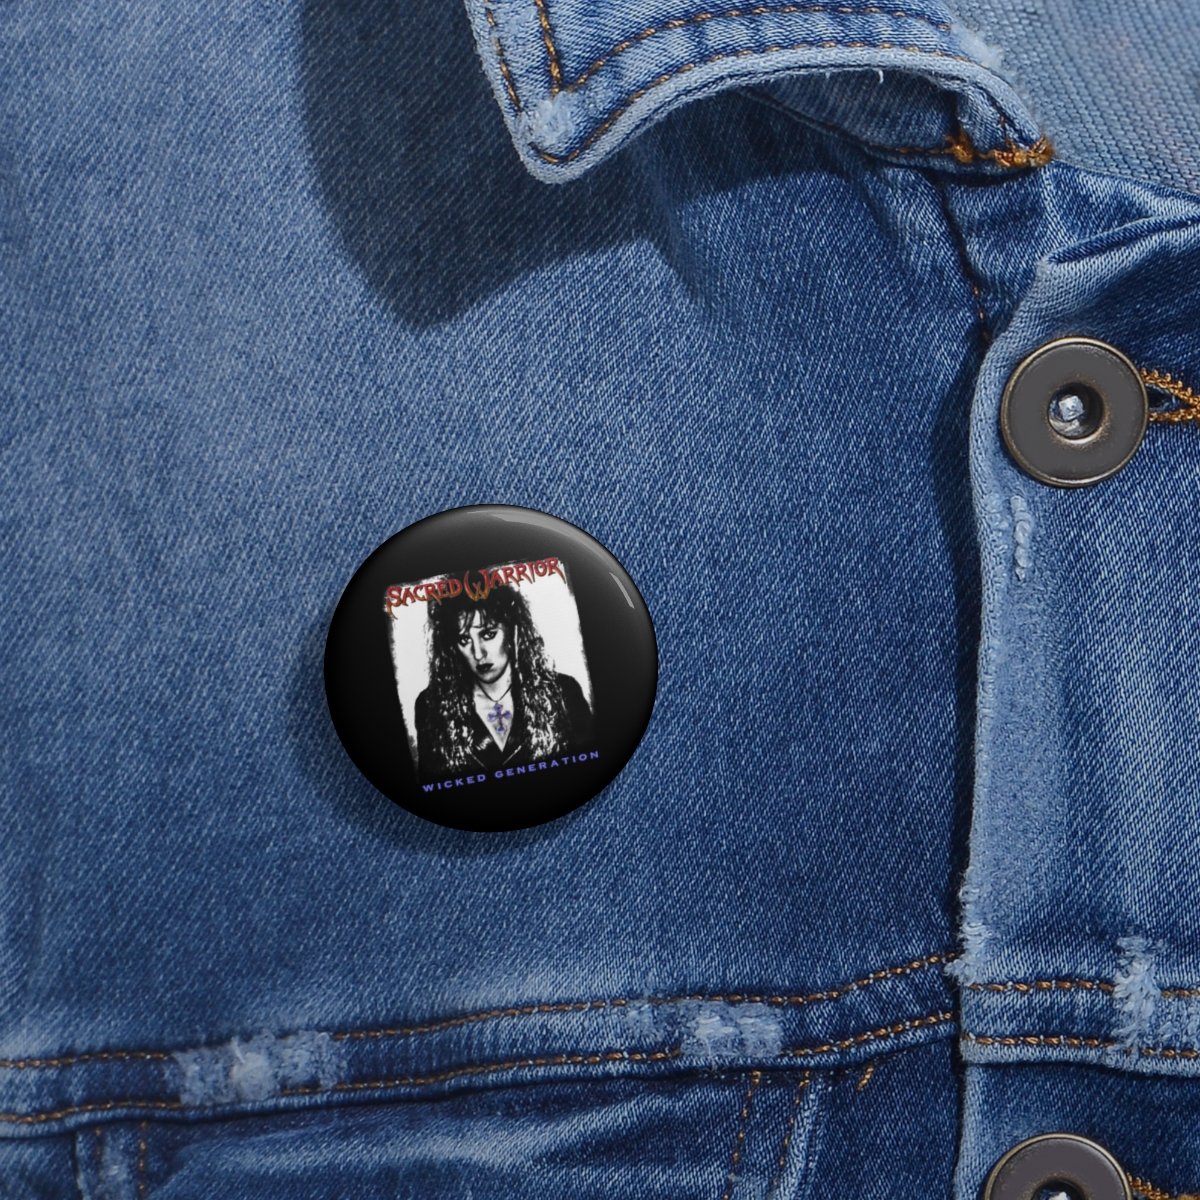 Sacred Warrior – Wicked Generation Pin Buttons